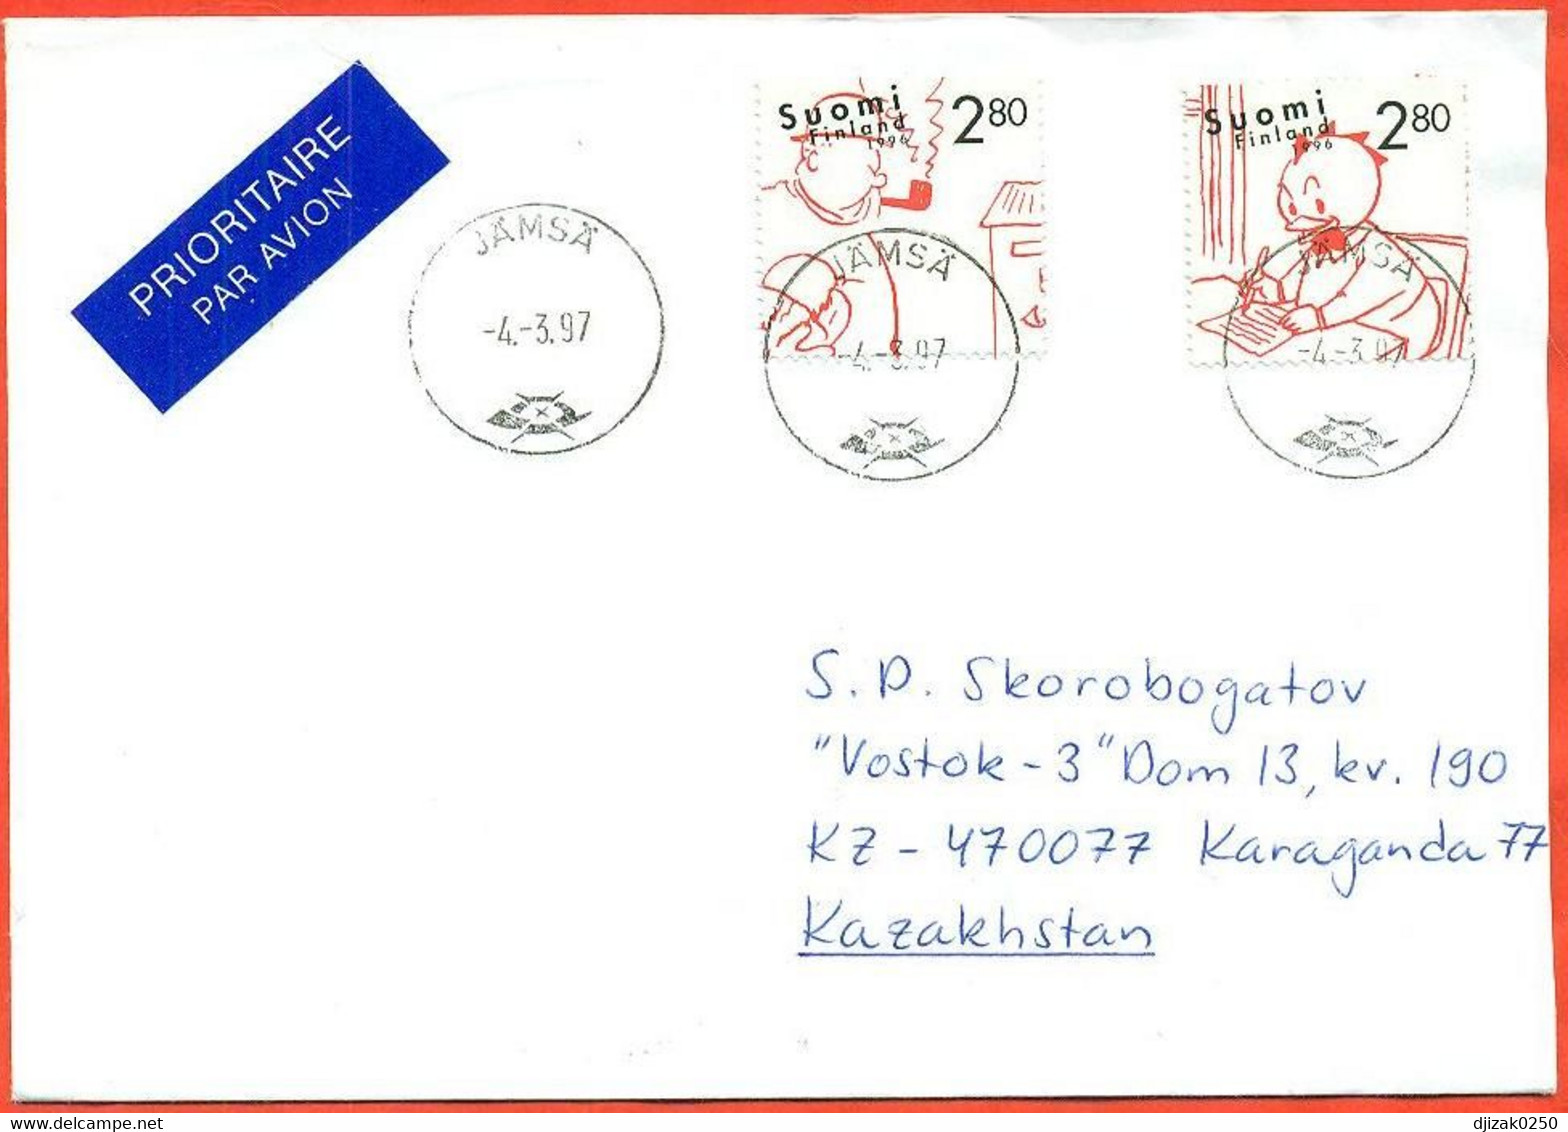 Finland 1997.The Envelope Passed Through The Mail. Airmail. - Covers & Documents